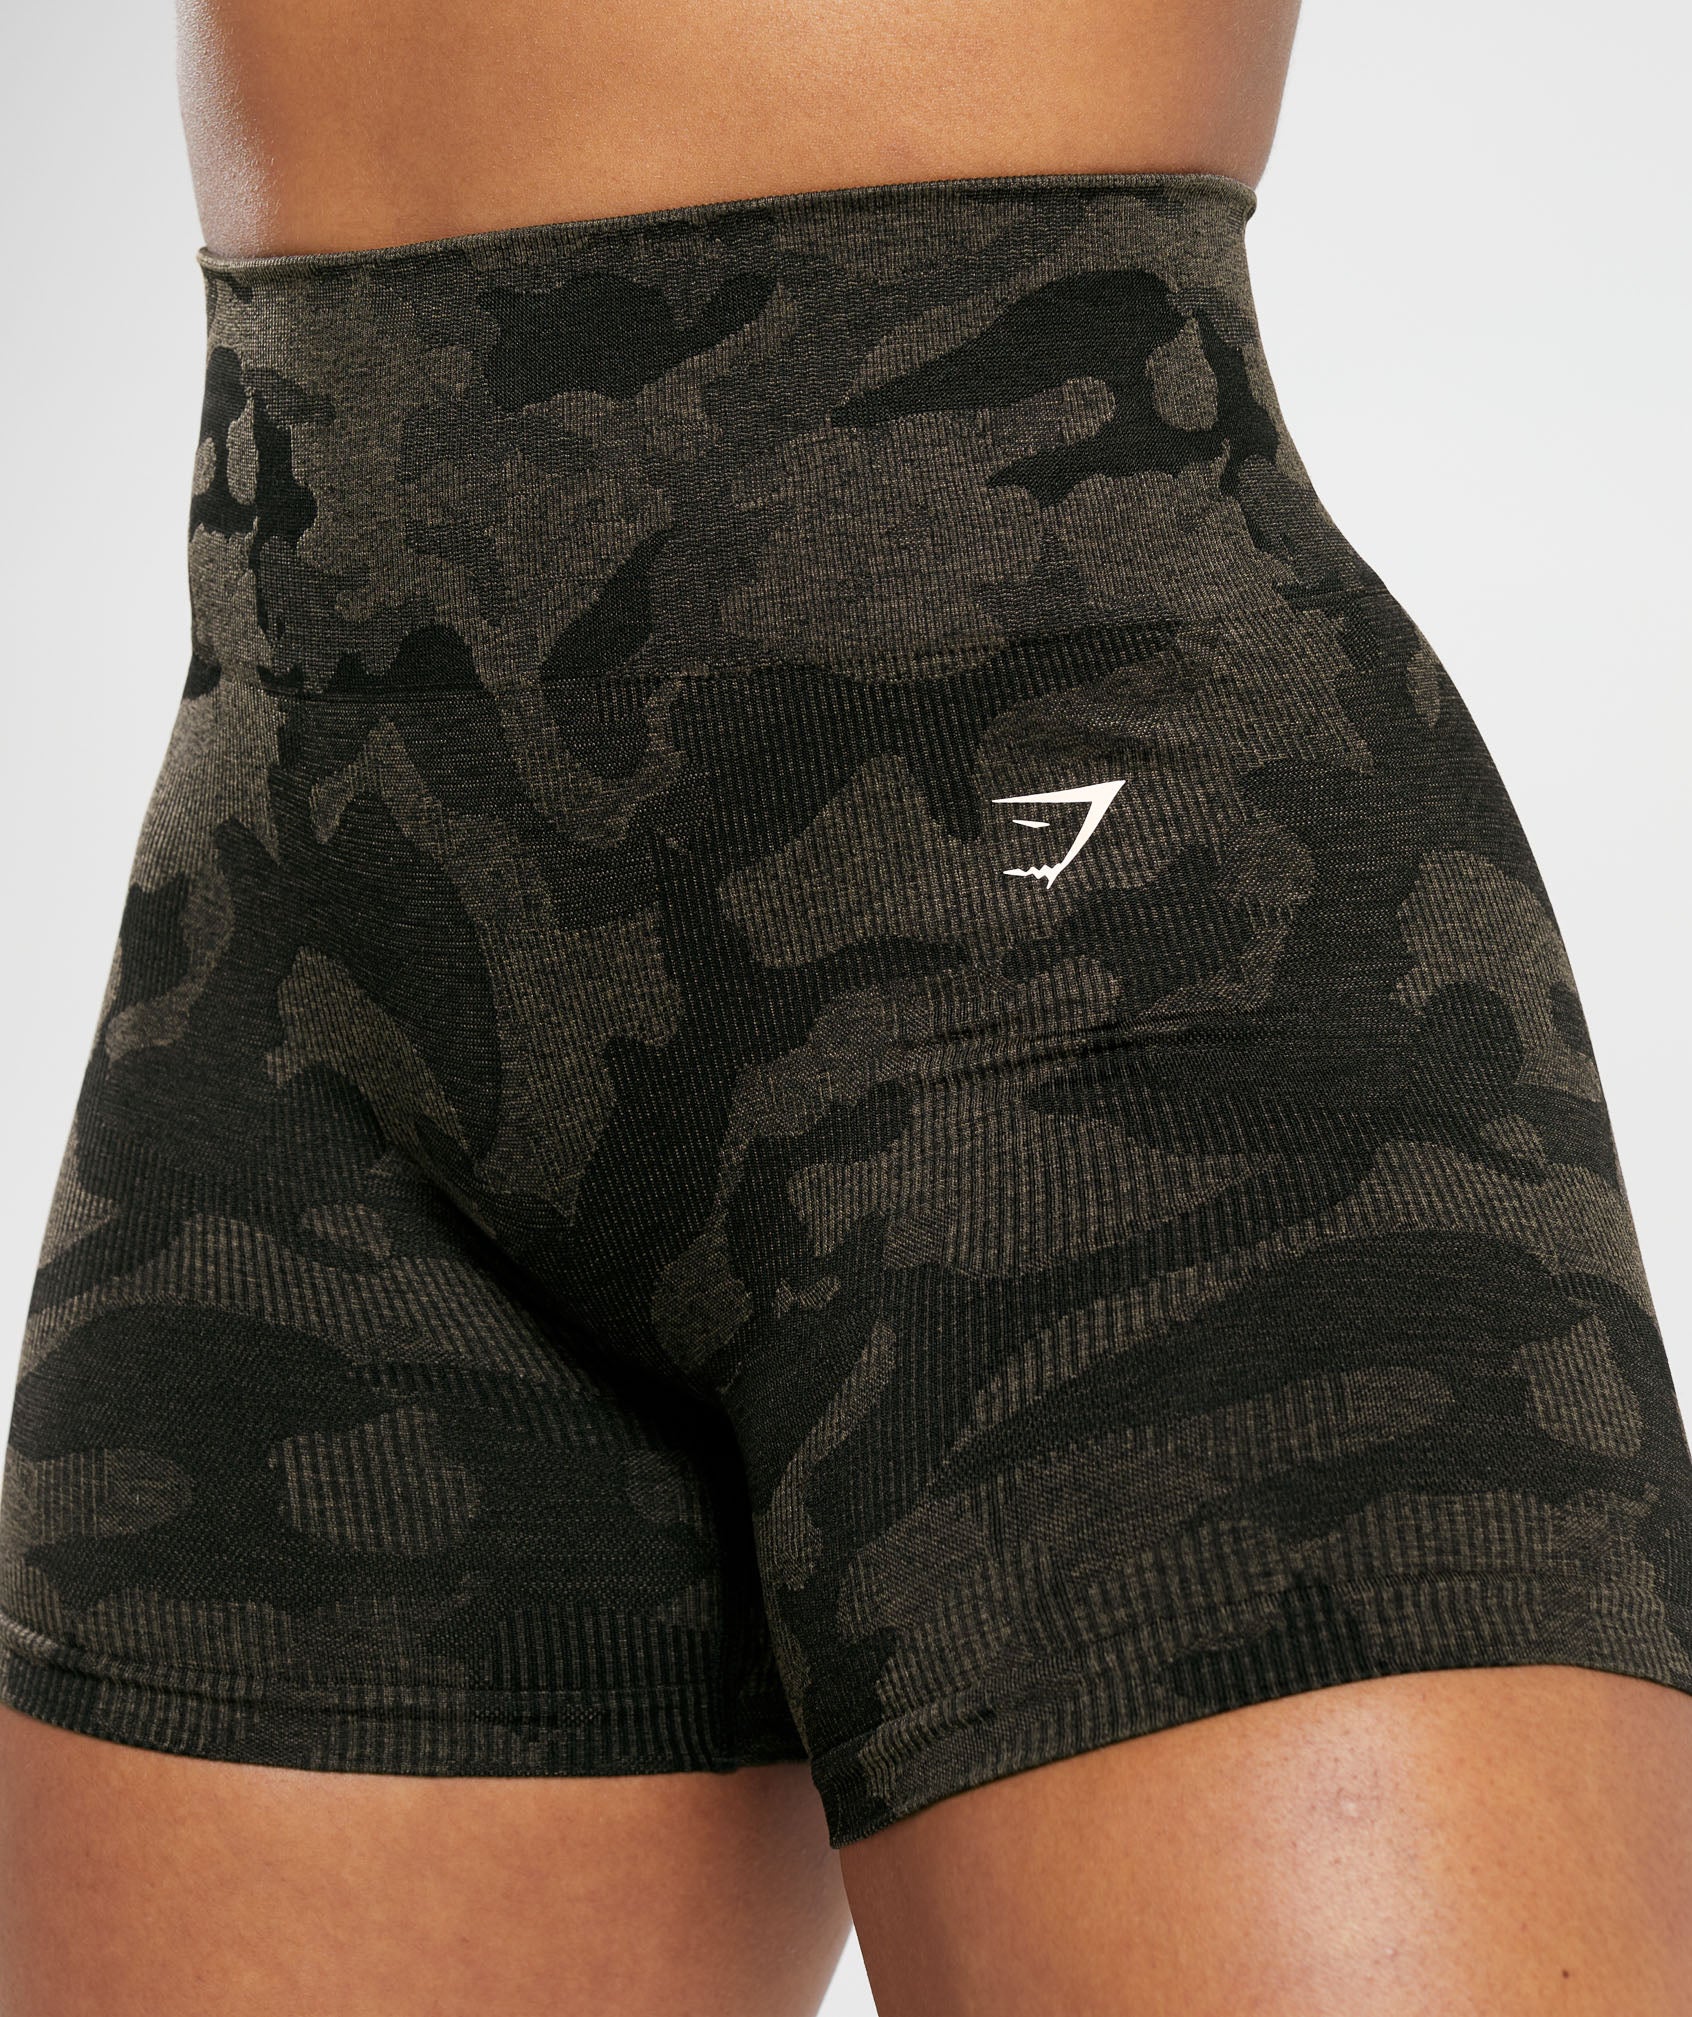 Adapt Camo Seamless Ribbed Shorts in Black/Camo Brown - view 5